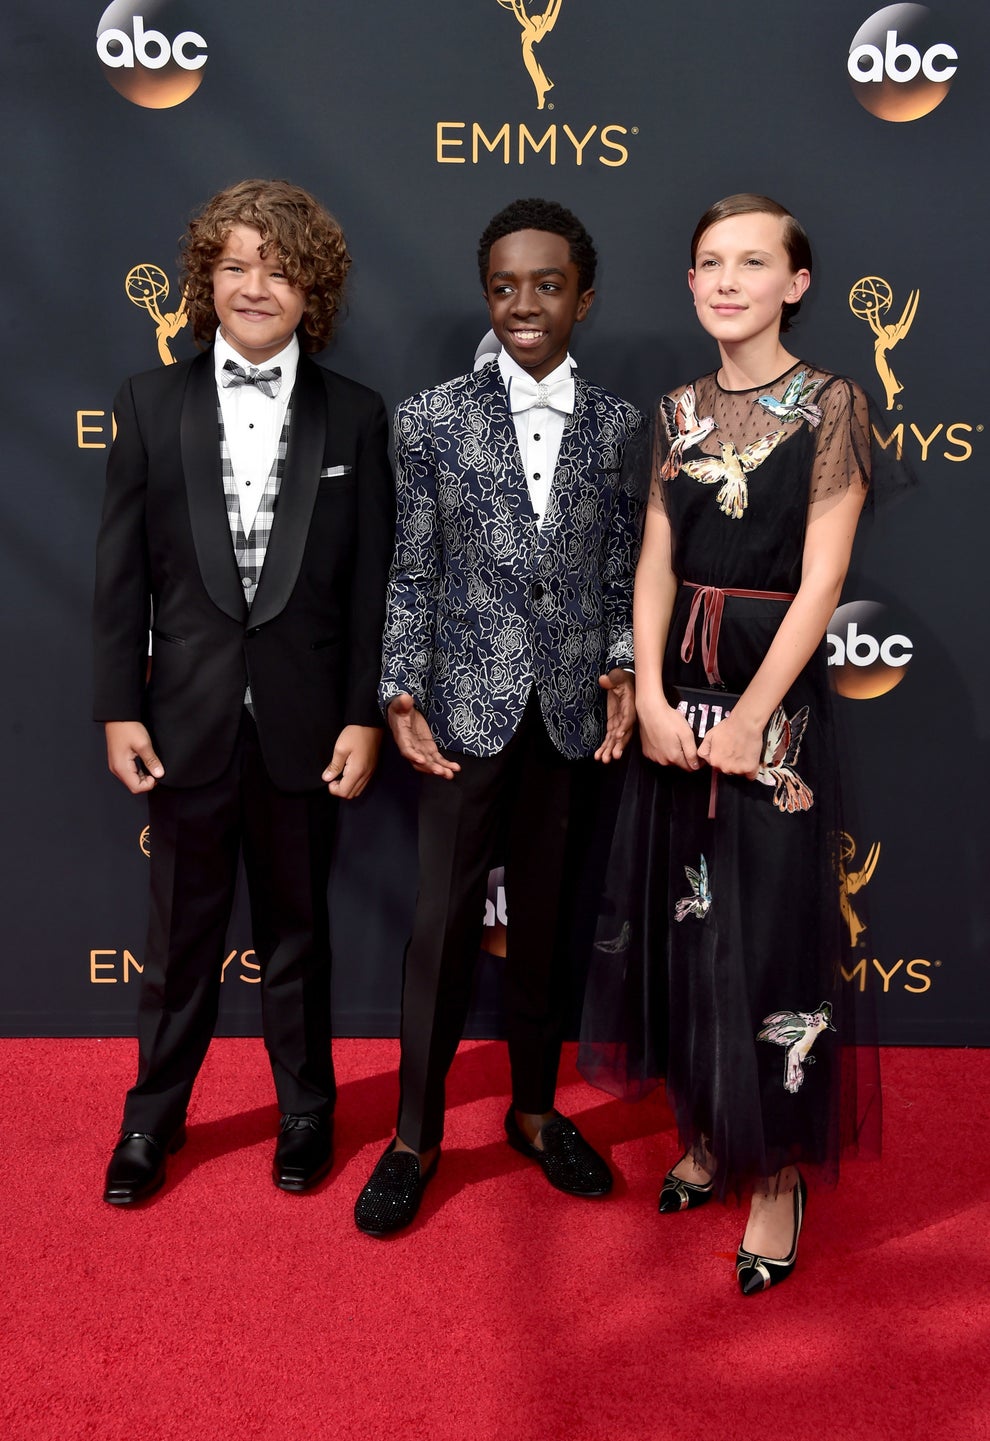 Millie Bobby Brown's Possibly History-Making Emmys Win Is ''Surreal